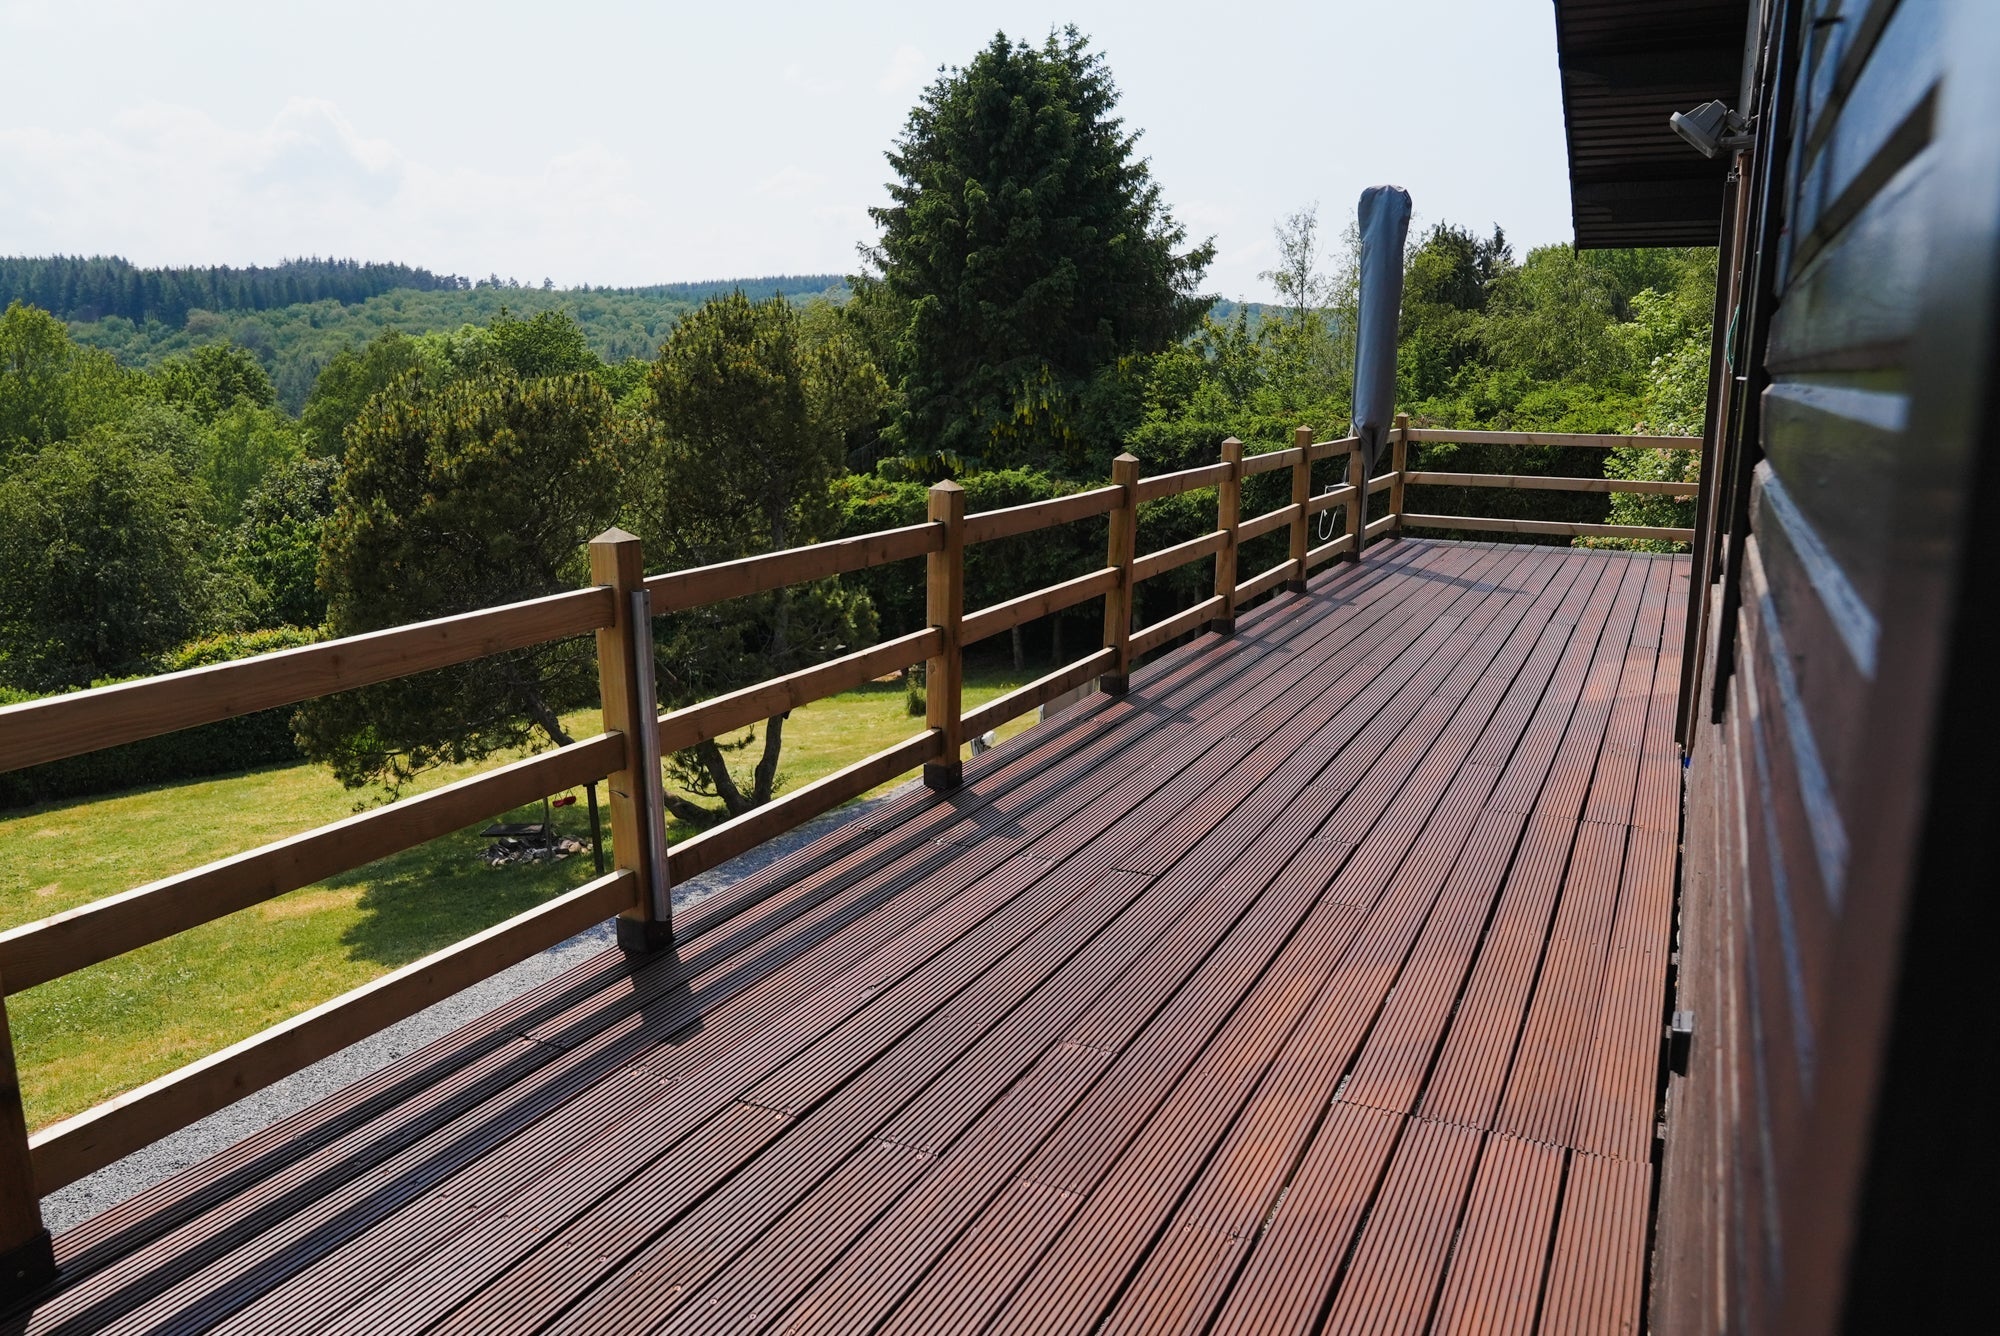 DuroGrit was used to colour and protect this wood deck in one single coat. It gave it tough mechanical resistance and strong UV protection in just one application!